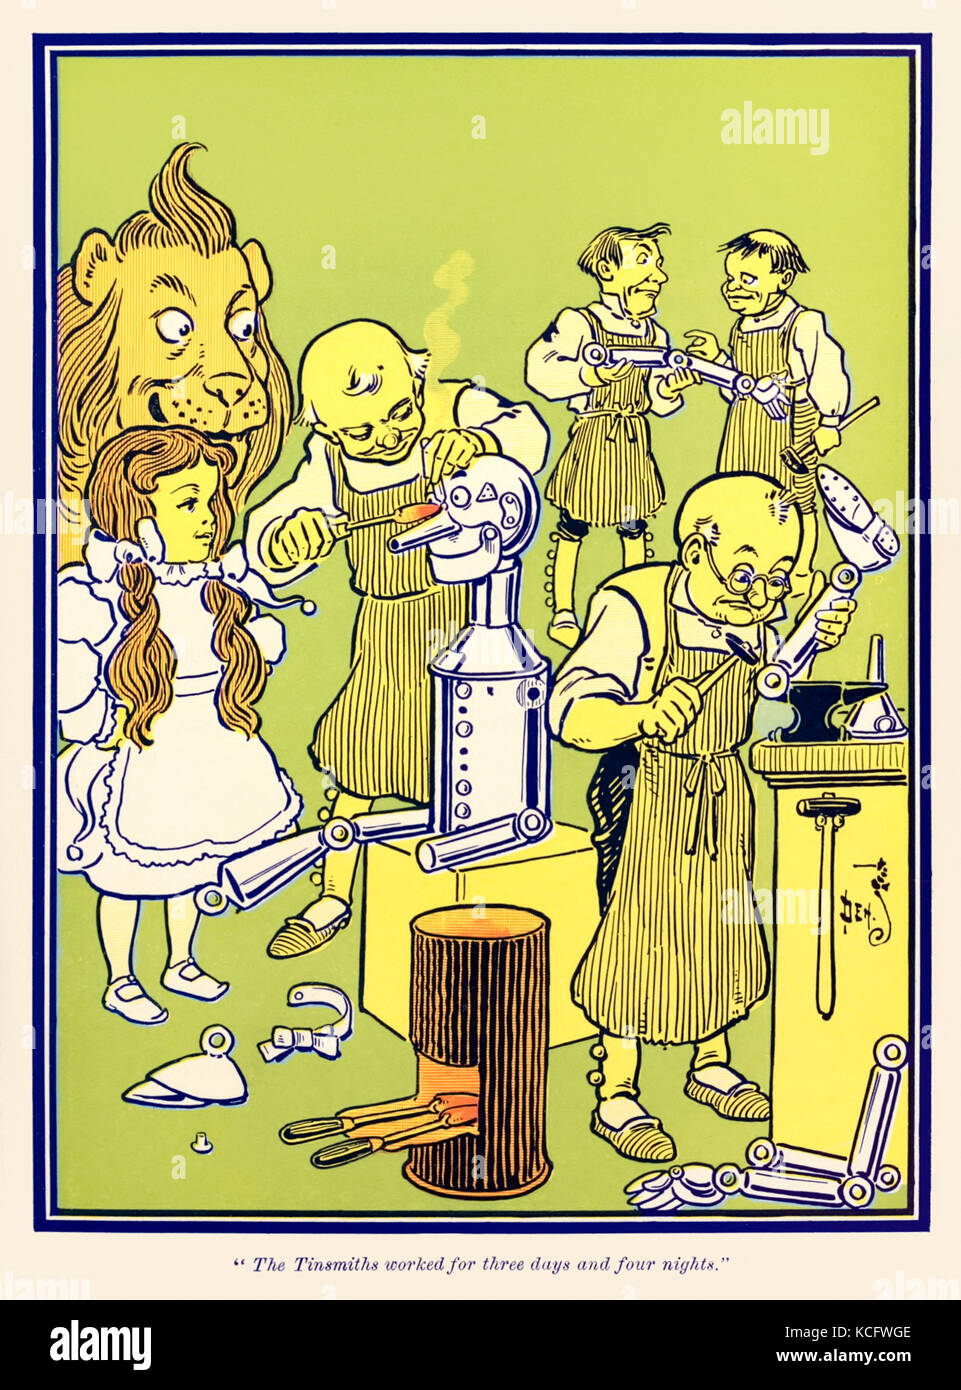 “The Tinsmiths worked for three days and four nights.” from ‘The Wonderful Wizard of Oz’ by L. Frank Baum (1856-1919) with pictures by W. W. Denslow (1856-1915). See more information below. Stock Photo